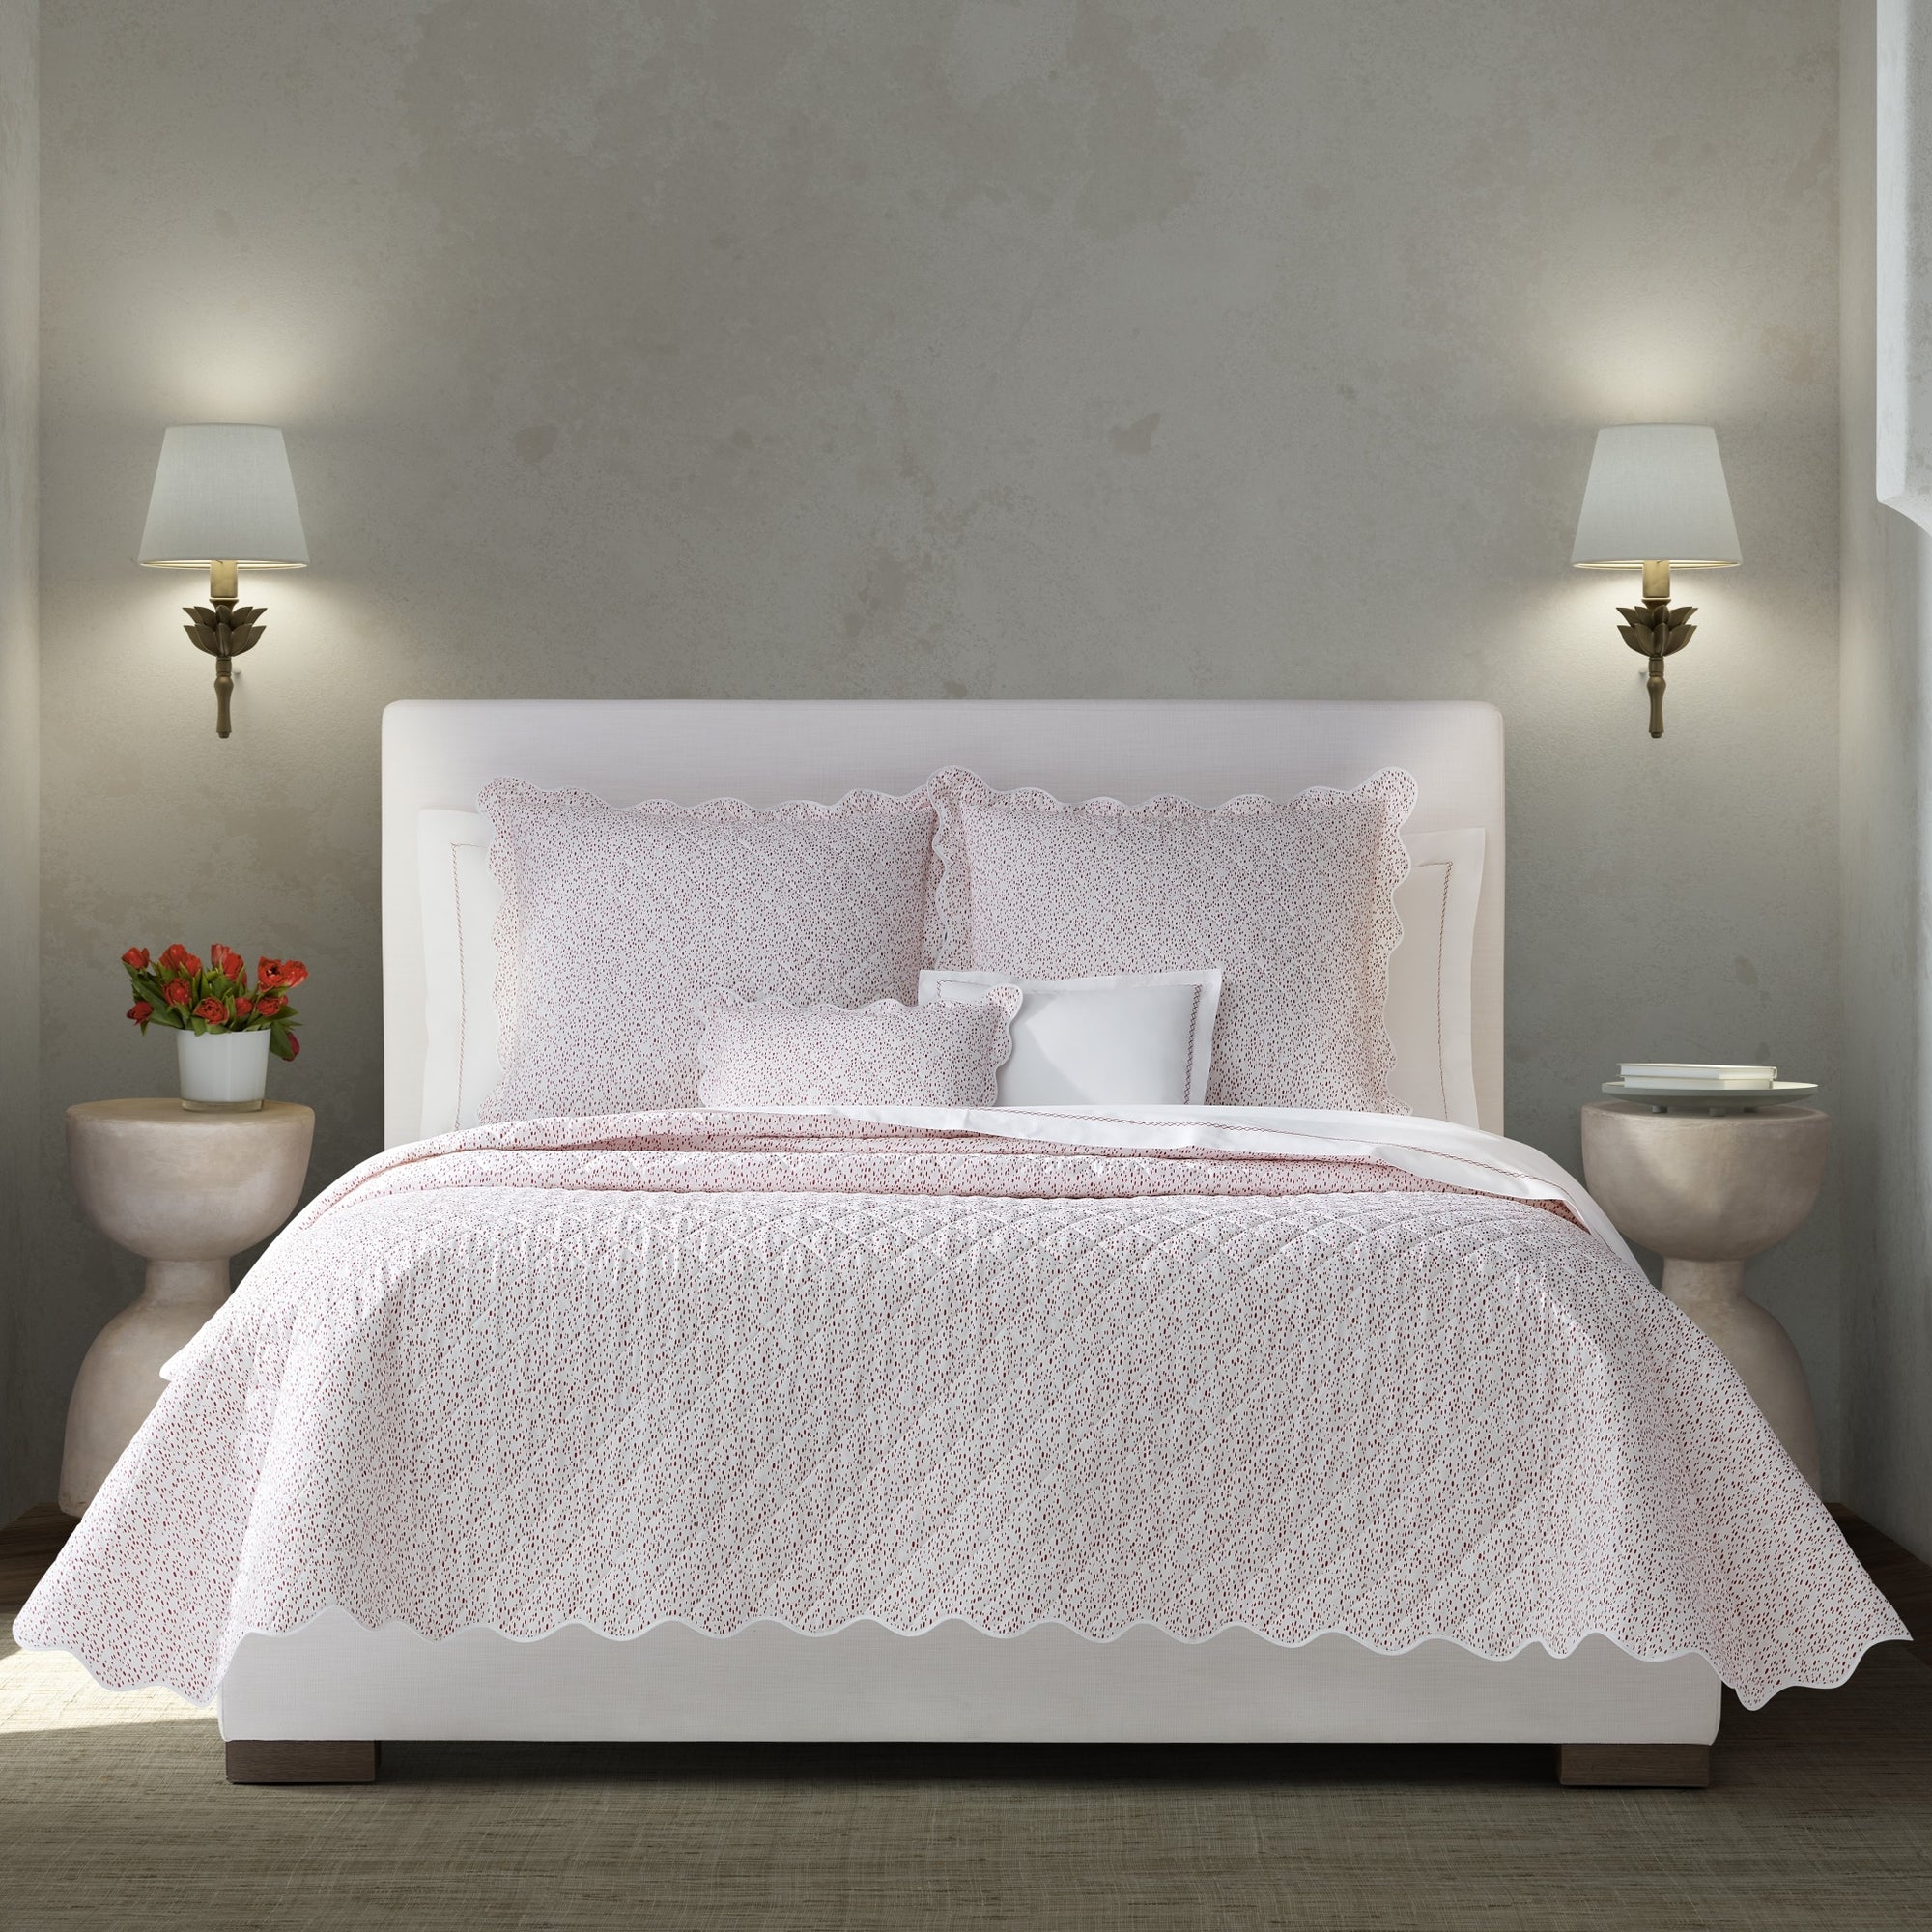 Full Bed Dressed in Matouk Celine Bedding in Redberry Color